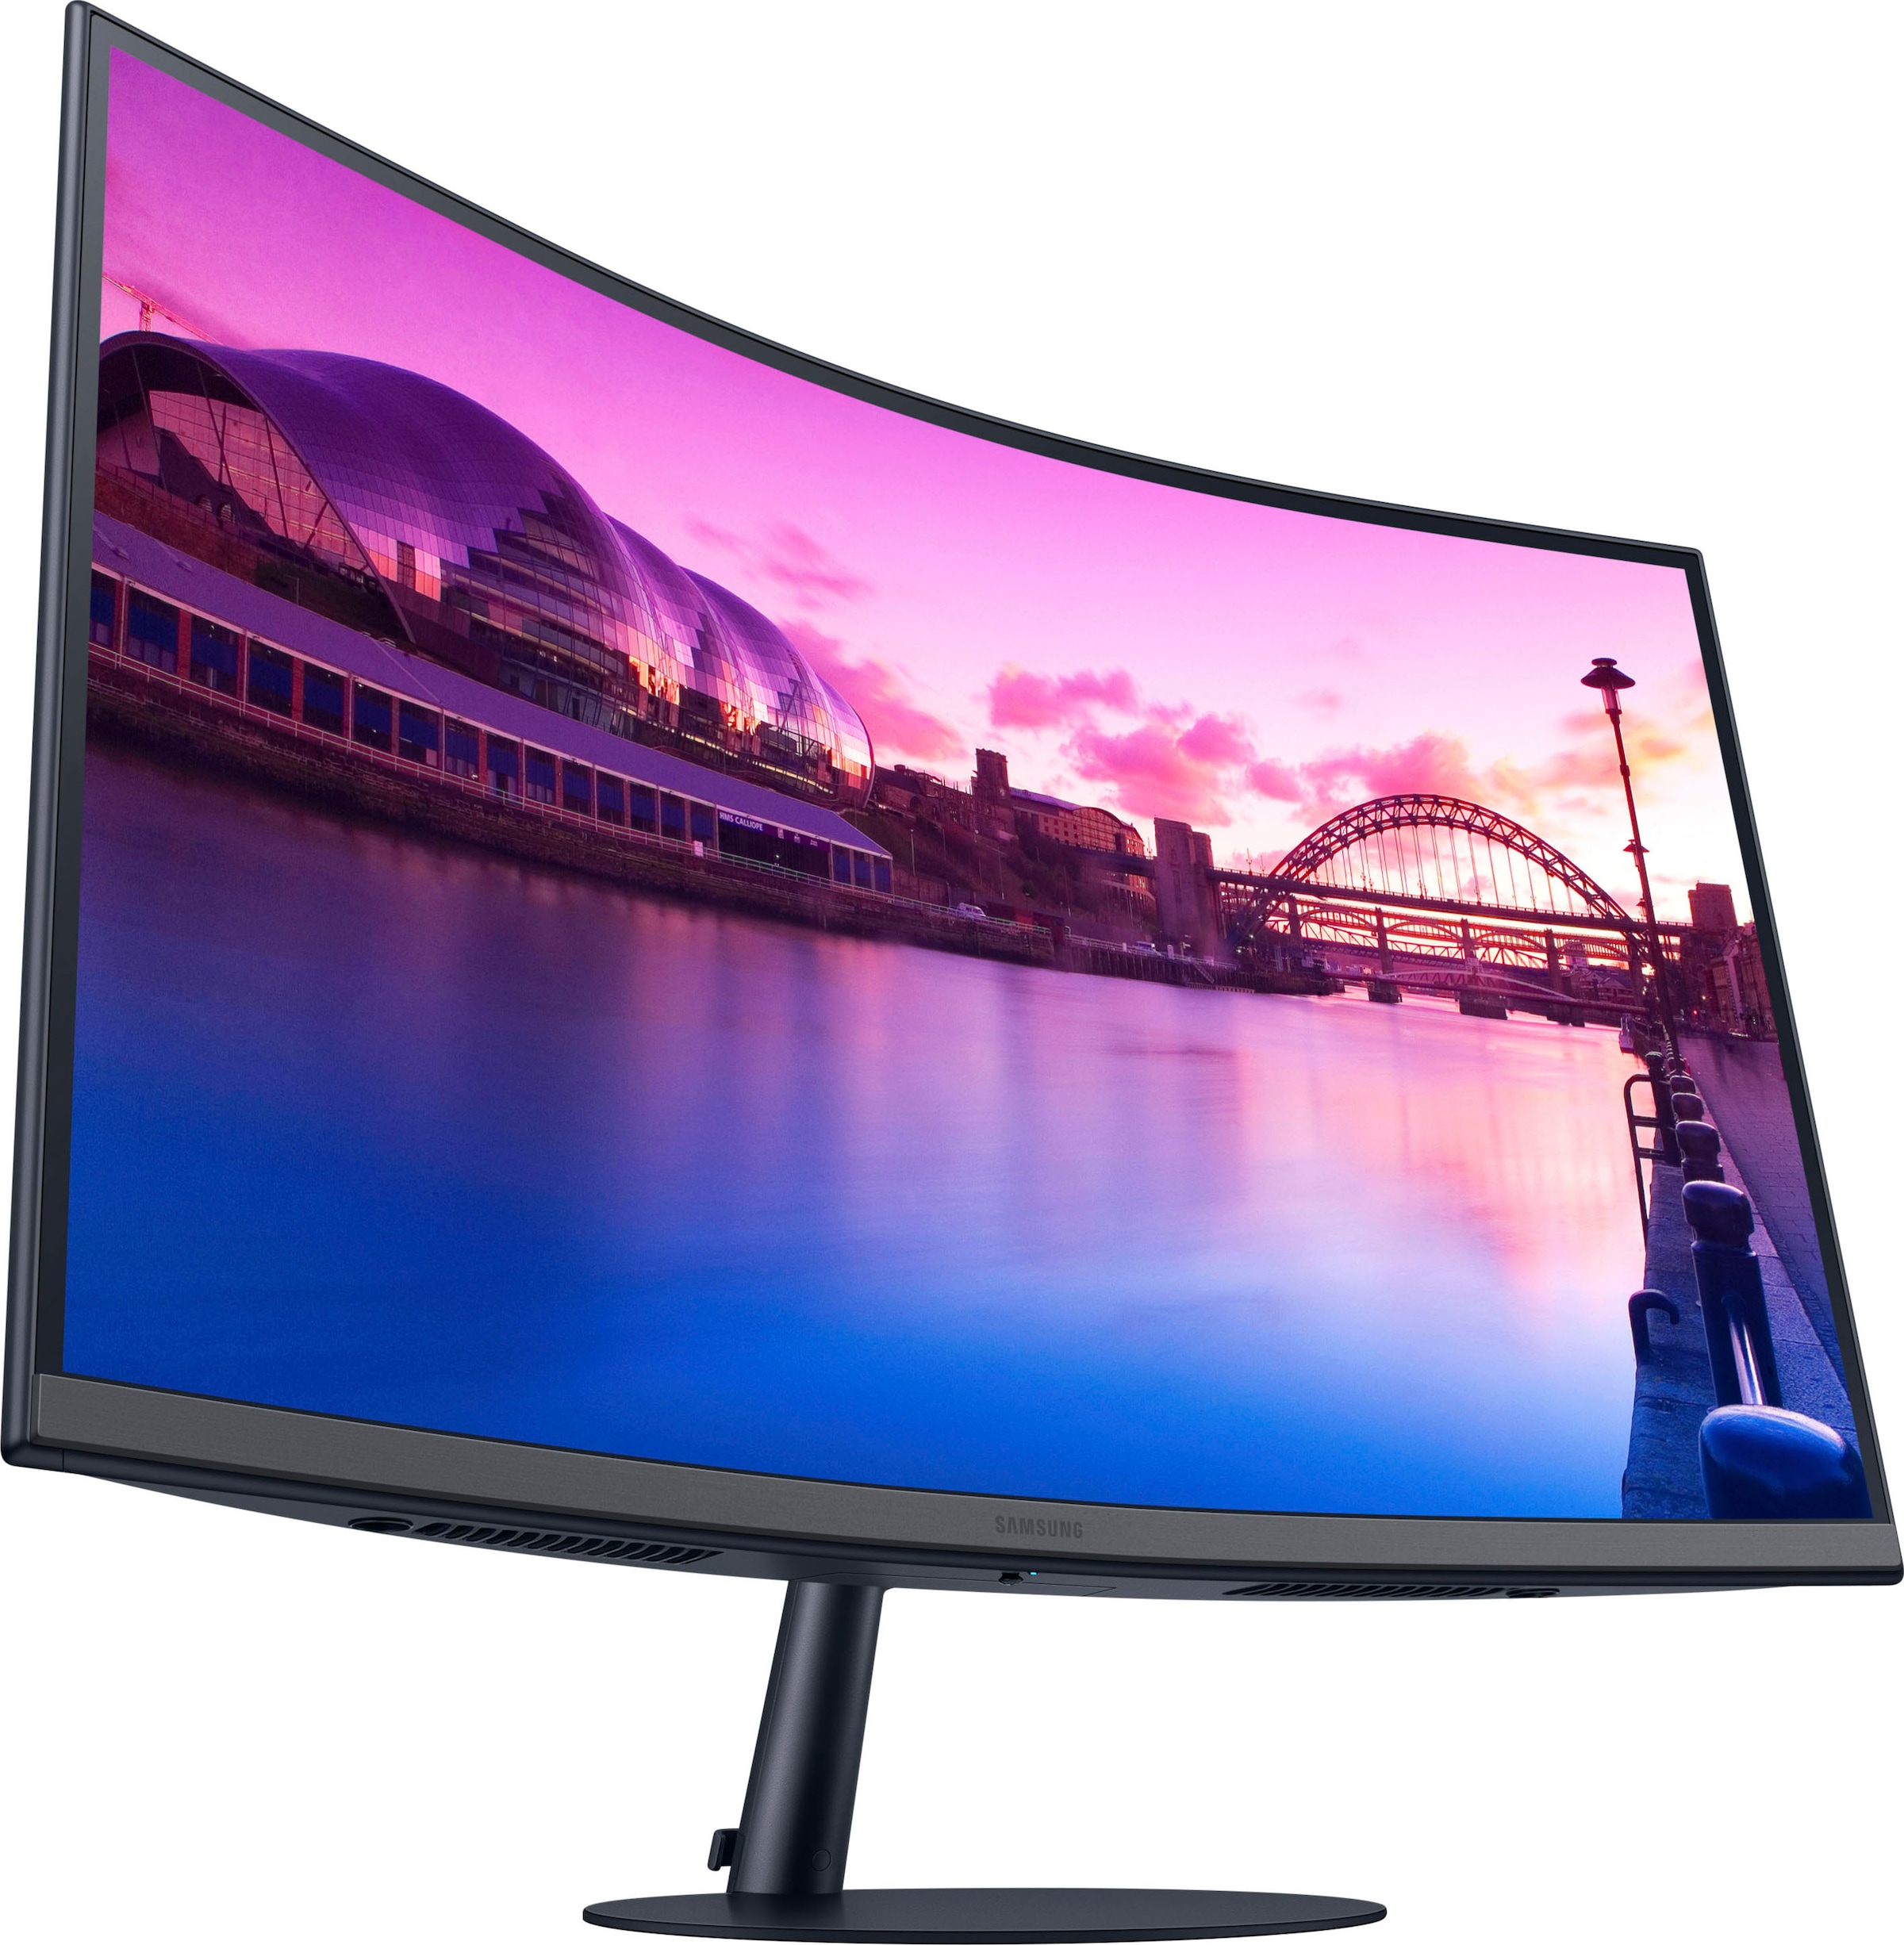 4 px, cm/27 »S27C390EAU«, Full 1920 Reaktionszeit, Hz HD, 68,6 OTTO ms 1080 x online 75 Zoll, bei Samsung Curved-LED-Monitor